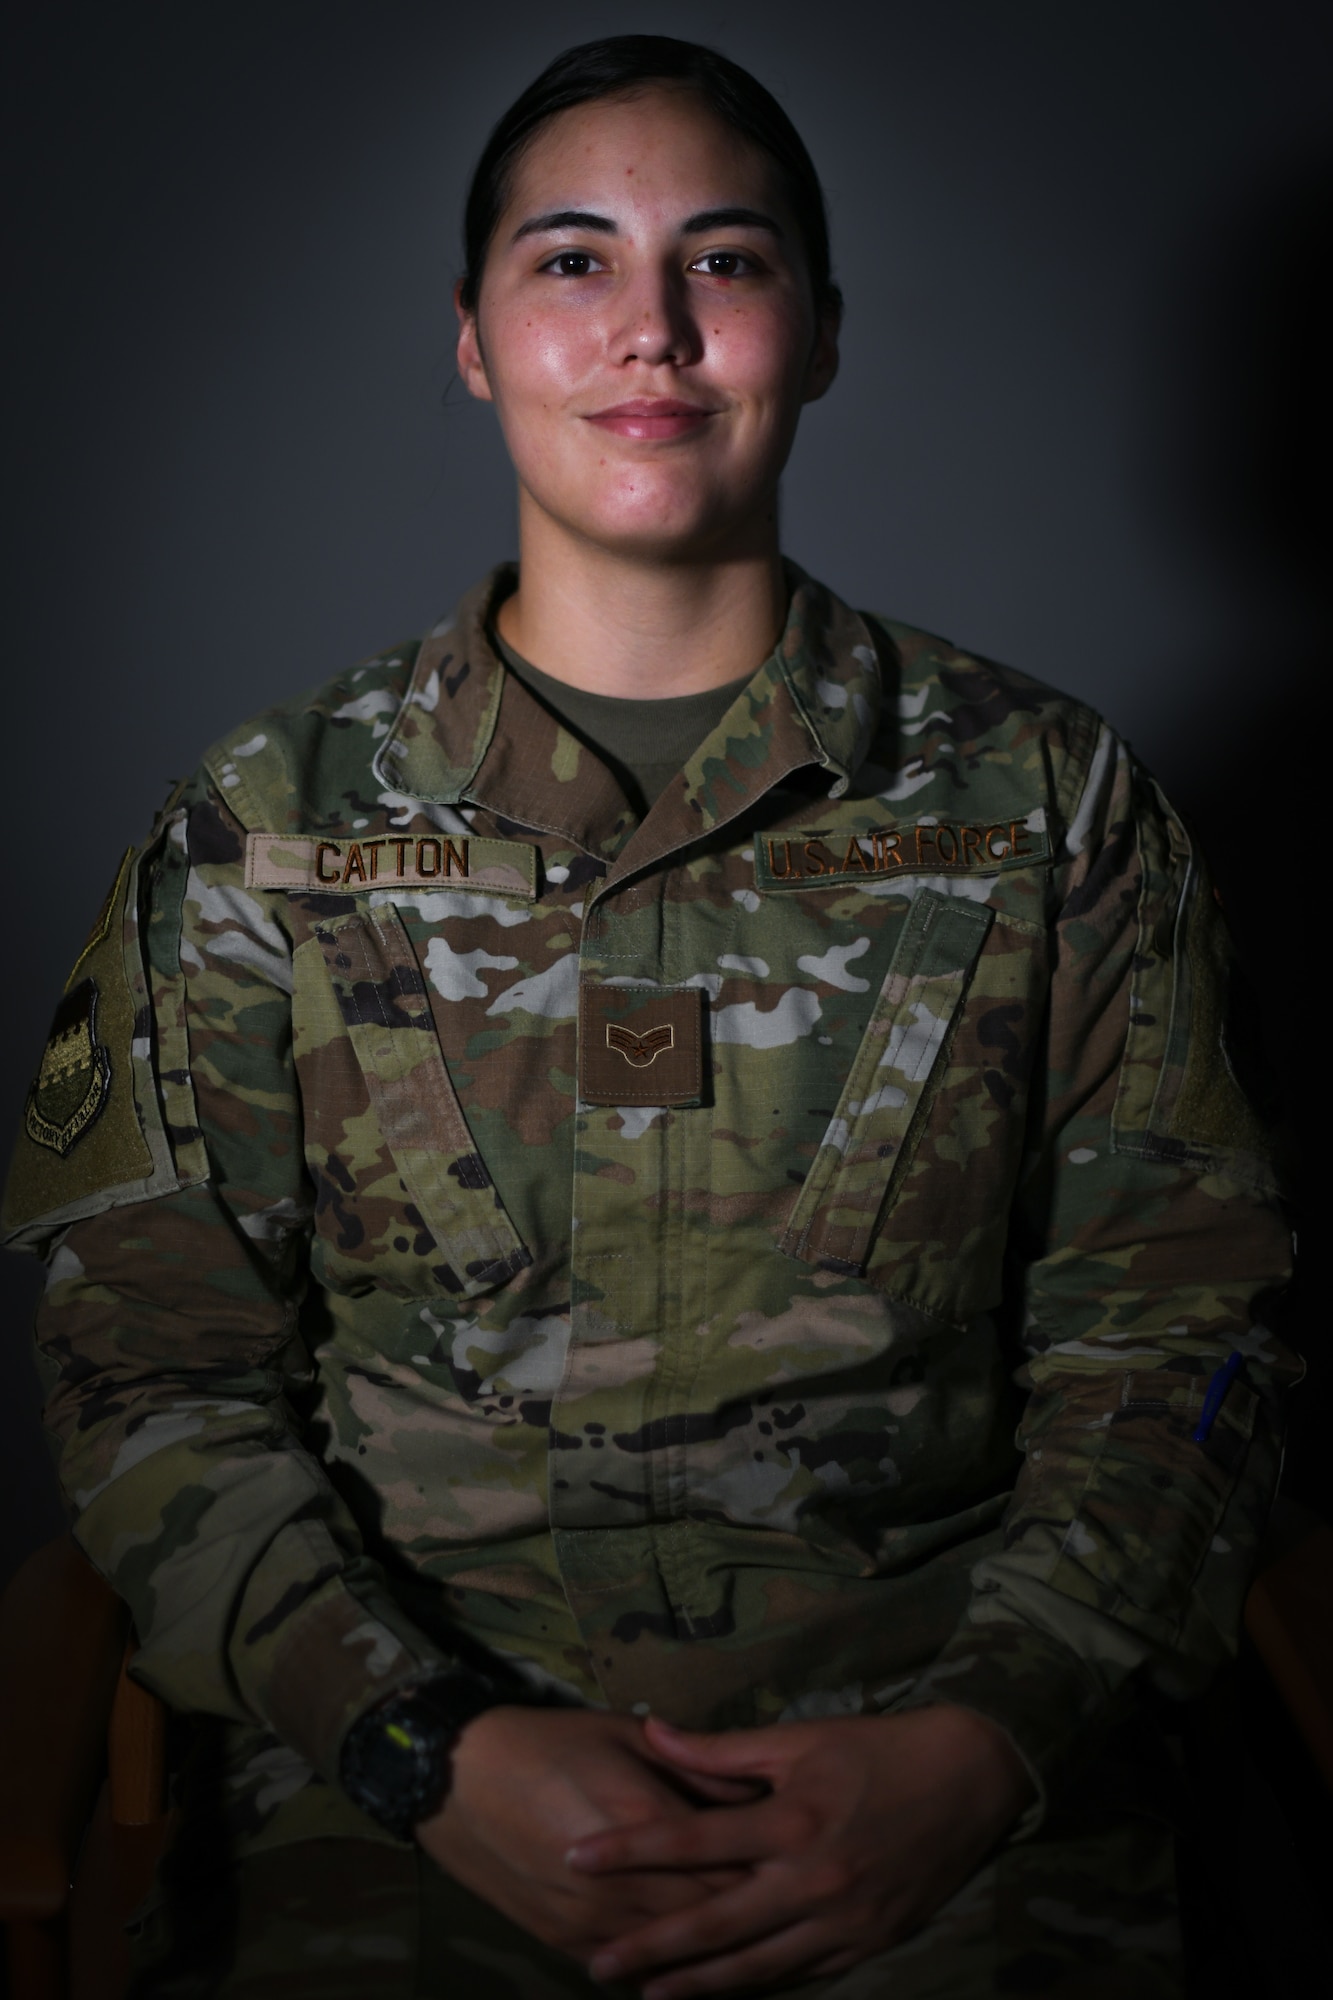 Military member poses for a photo against dark grey background.